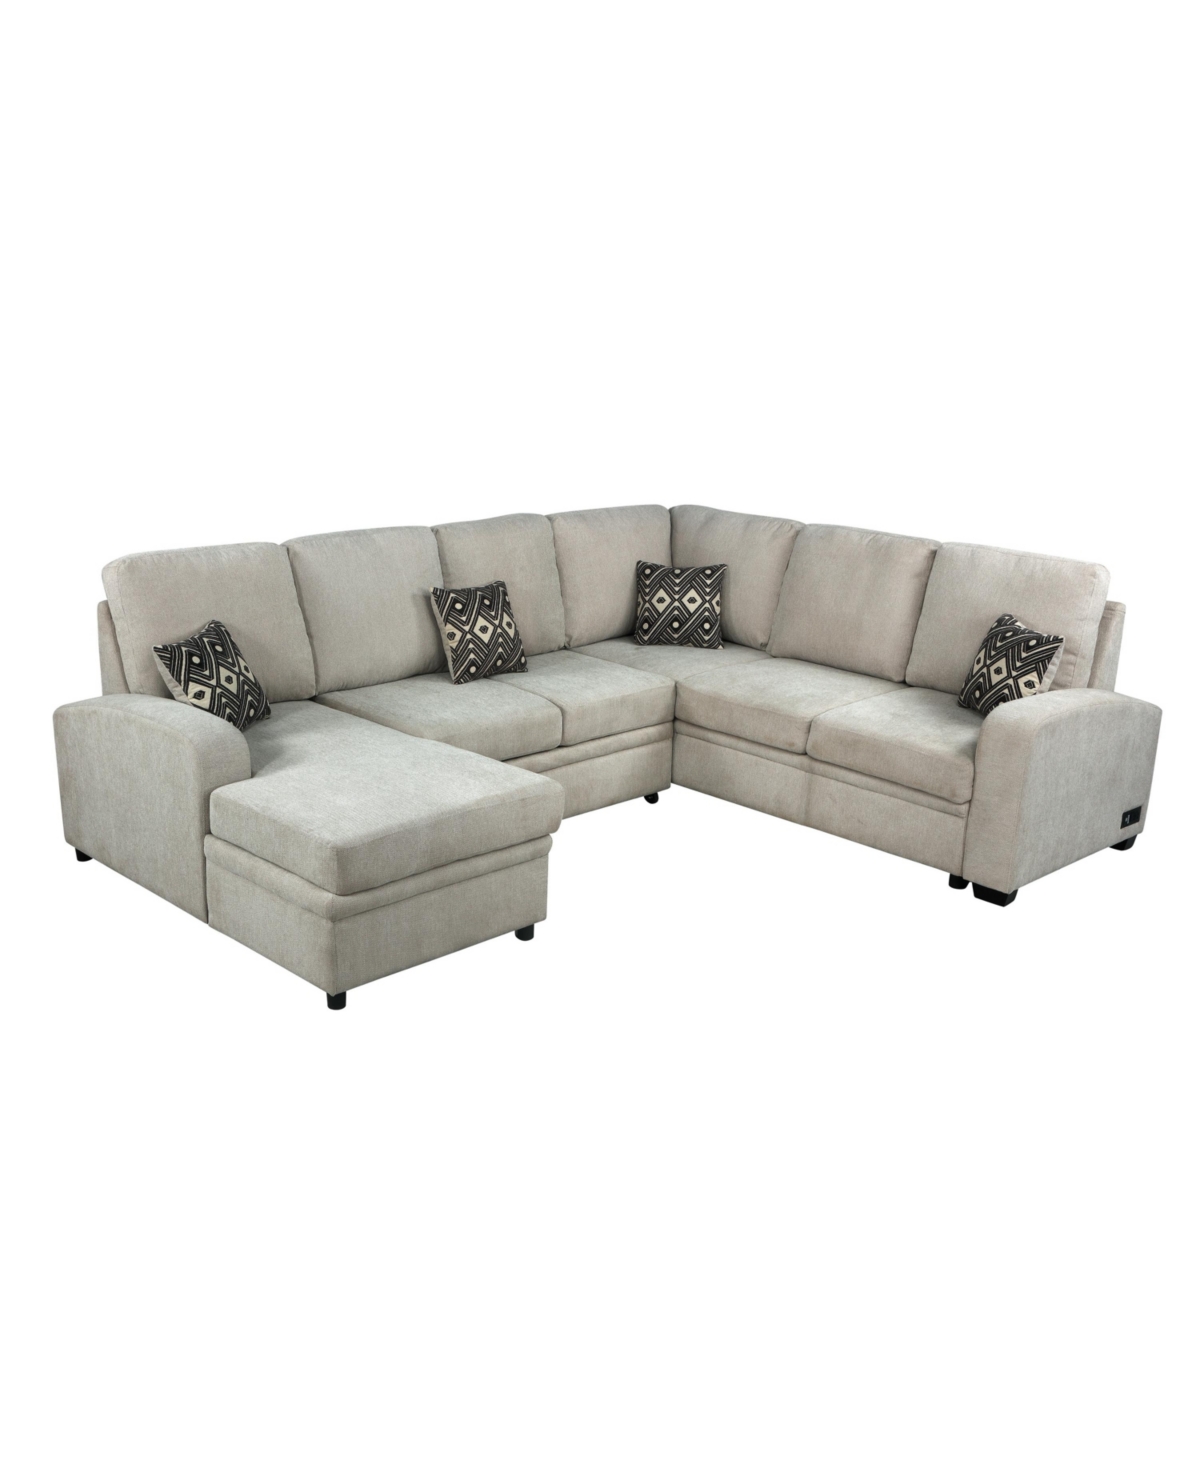 Serta Mae Sectional Sofa With Power And Usb Ports In Beige